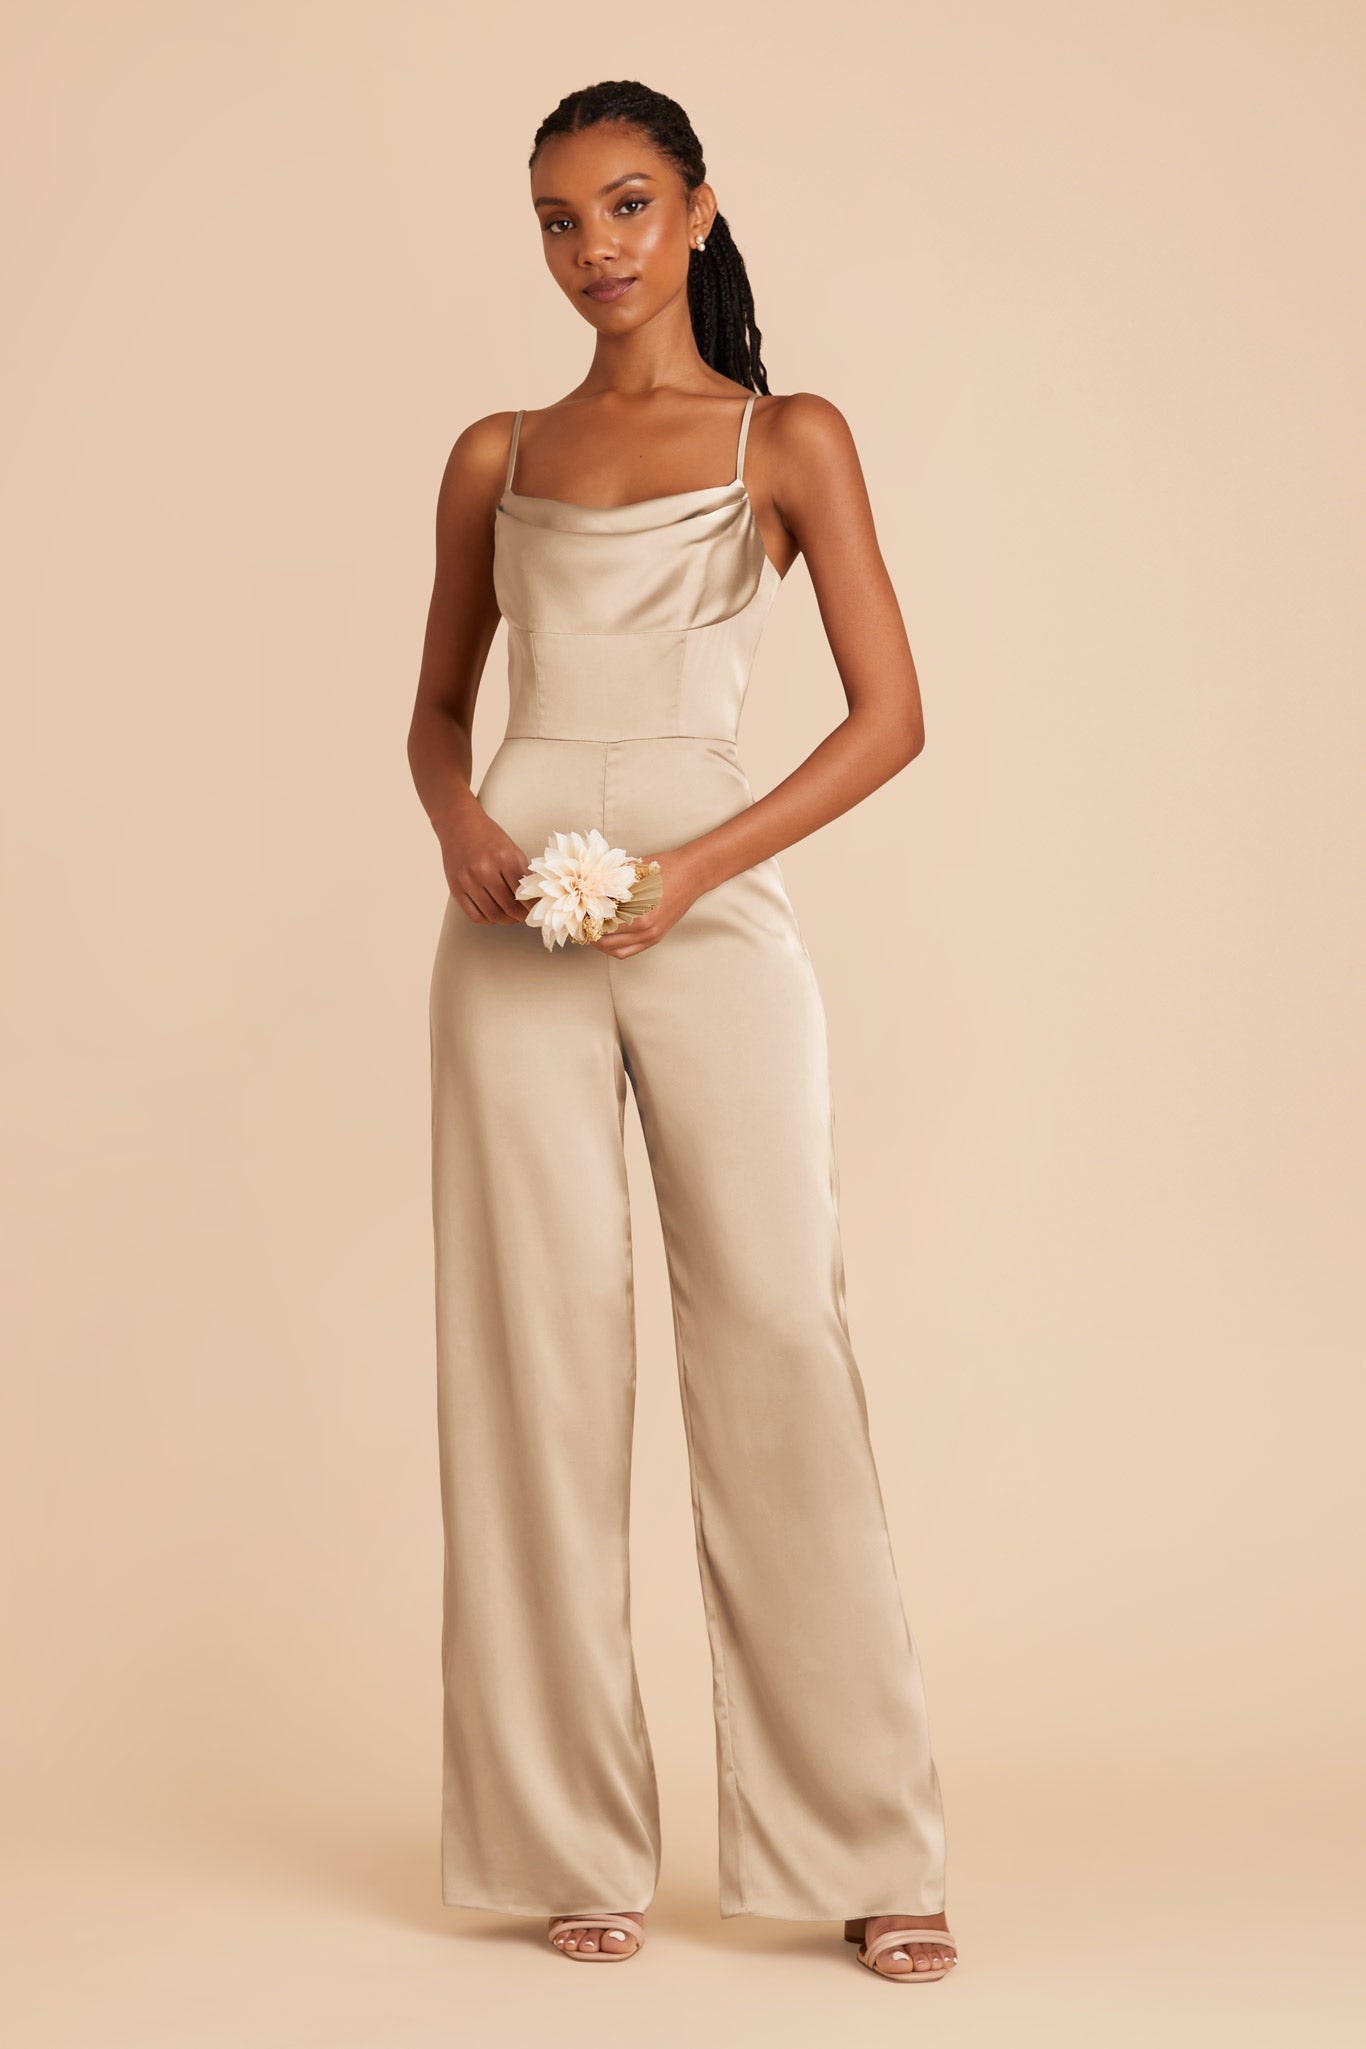 Gold Donna Matte Satin Bridesmaid Jumpsuit by Birdy grey